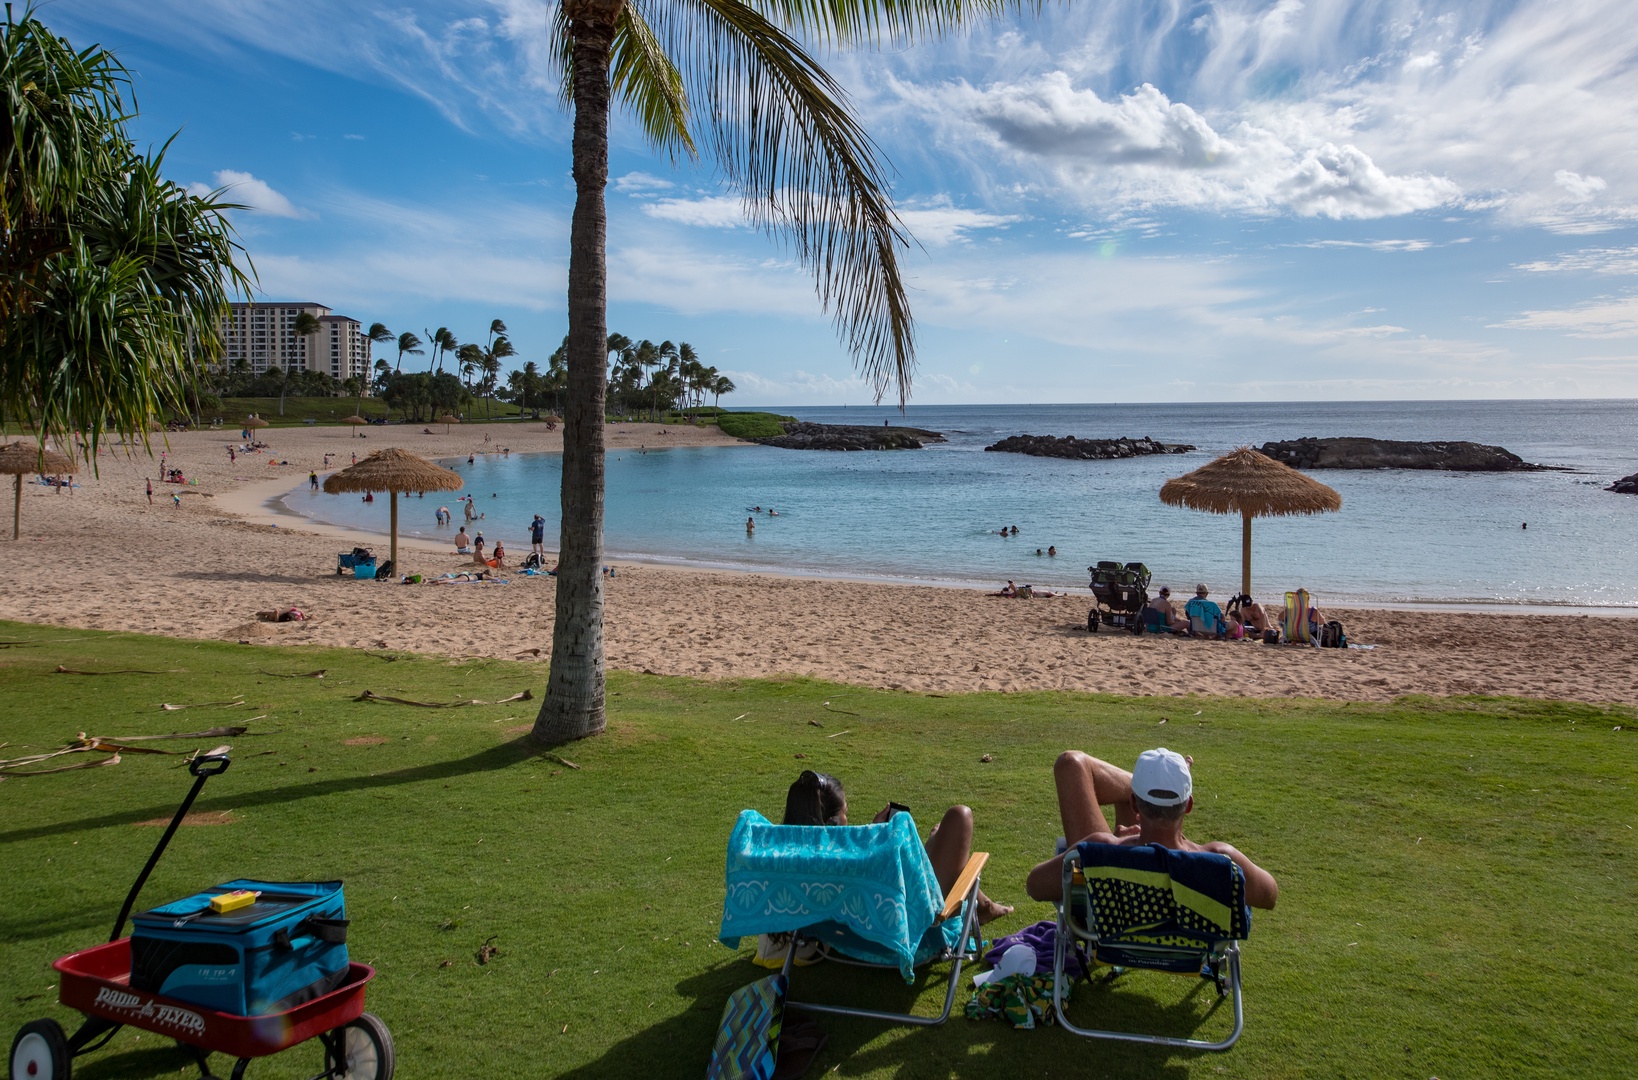 Kapolei Vacation Rentals, Coconut Plantation 1086-4 - Rest and renew with the sights and sounds of Hawaii at the tropical lagoon.